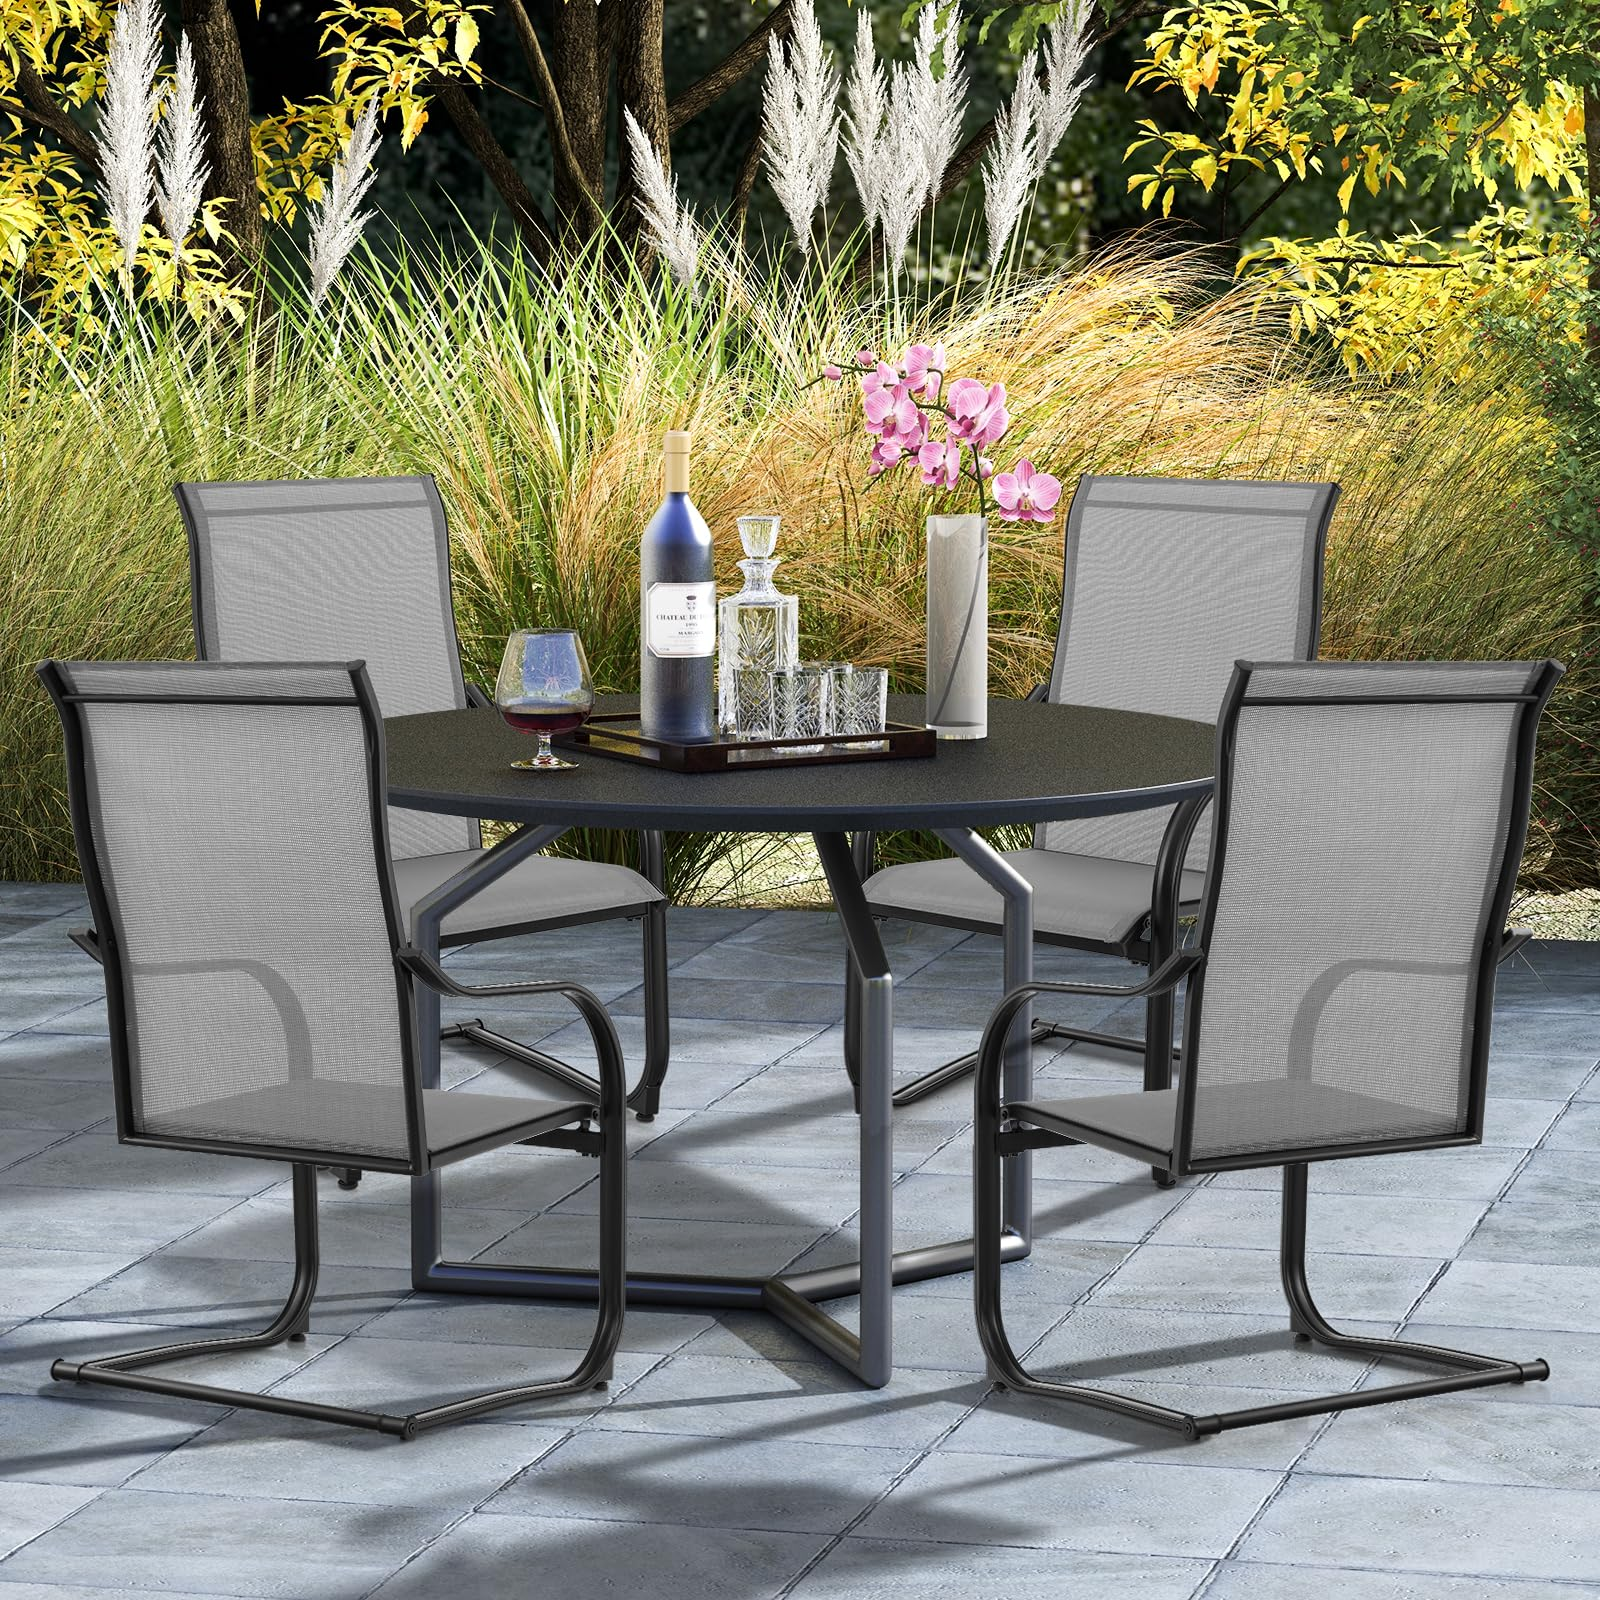 Giantex Patio Chairs, High Back Outdoor Chairs w/Sled Base, All Weather Fabric